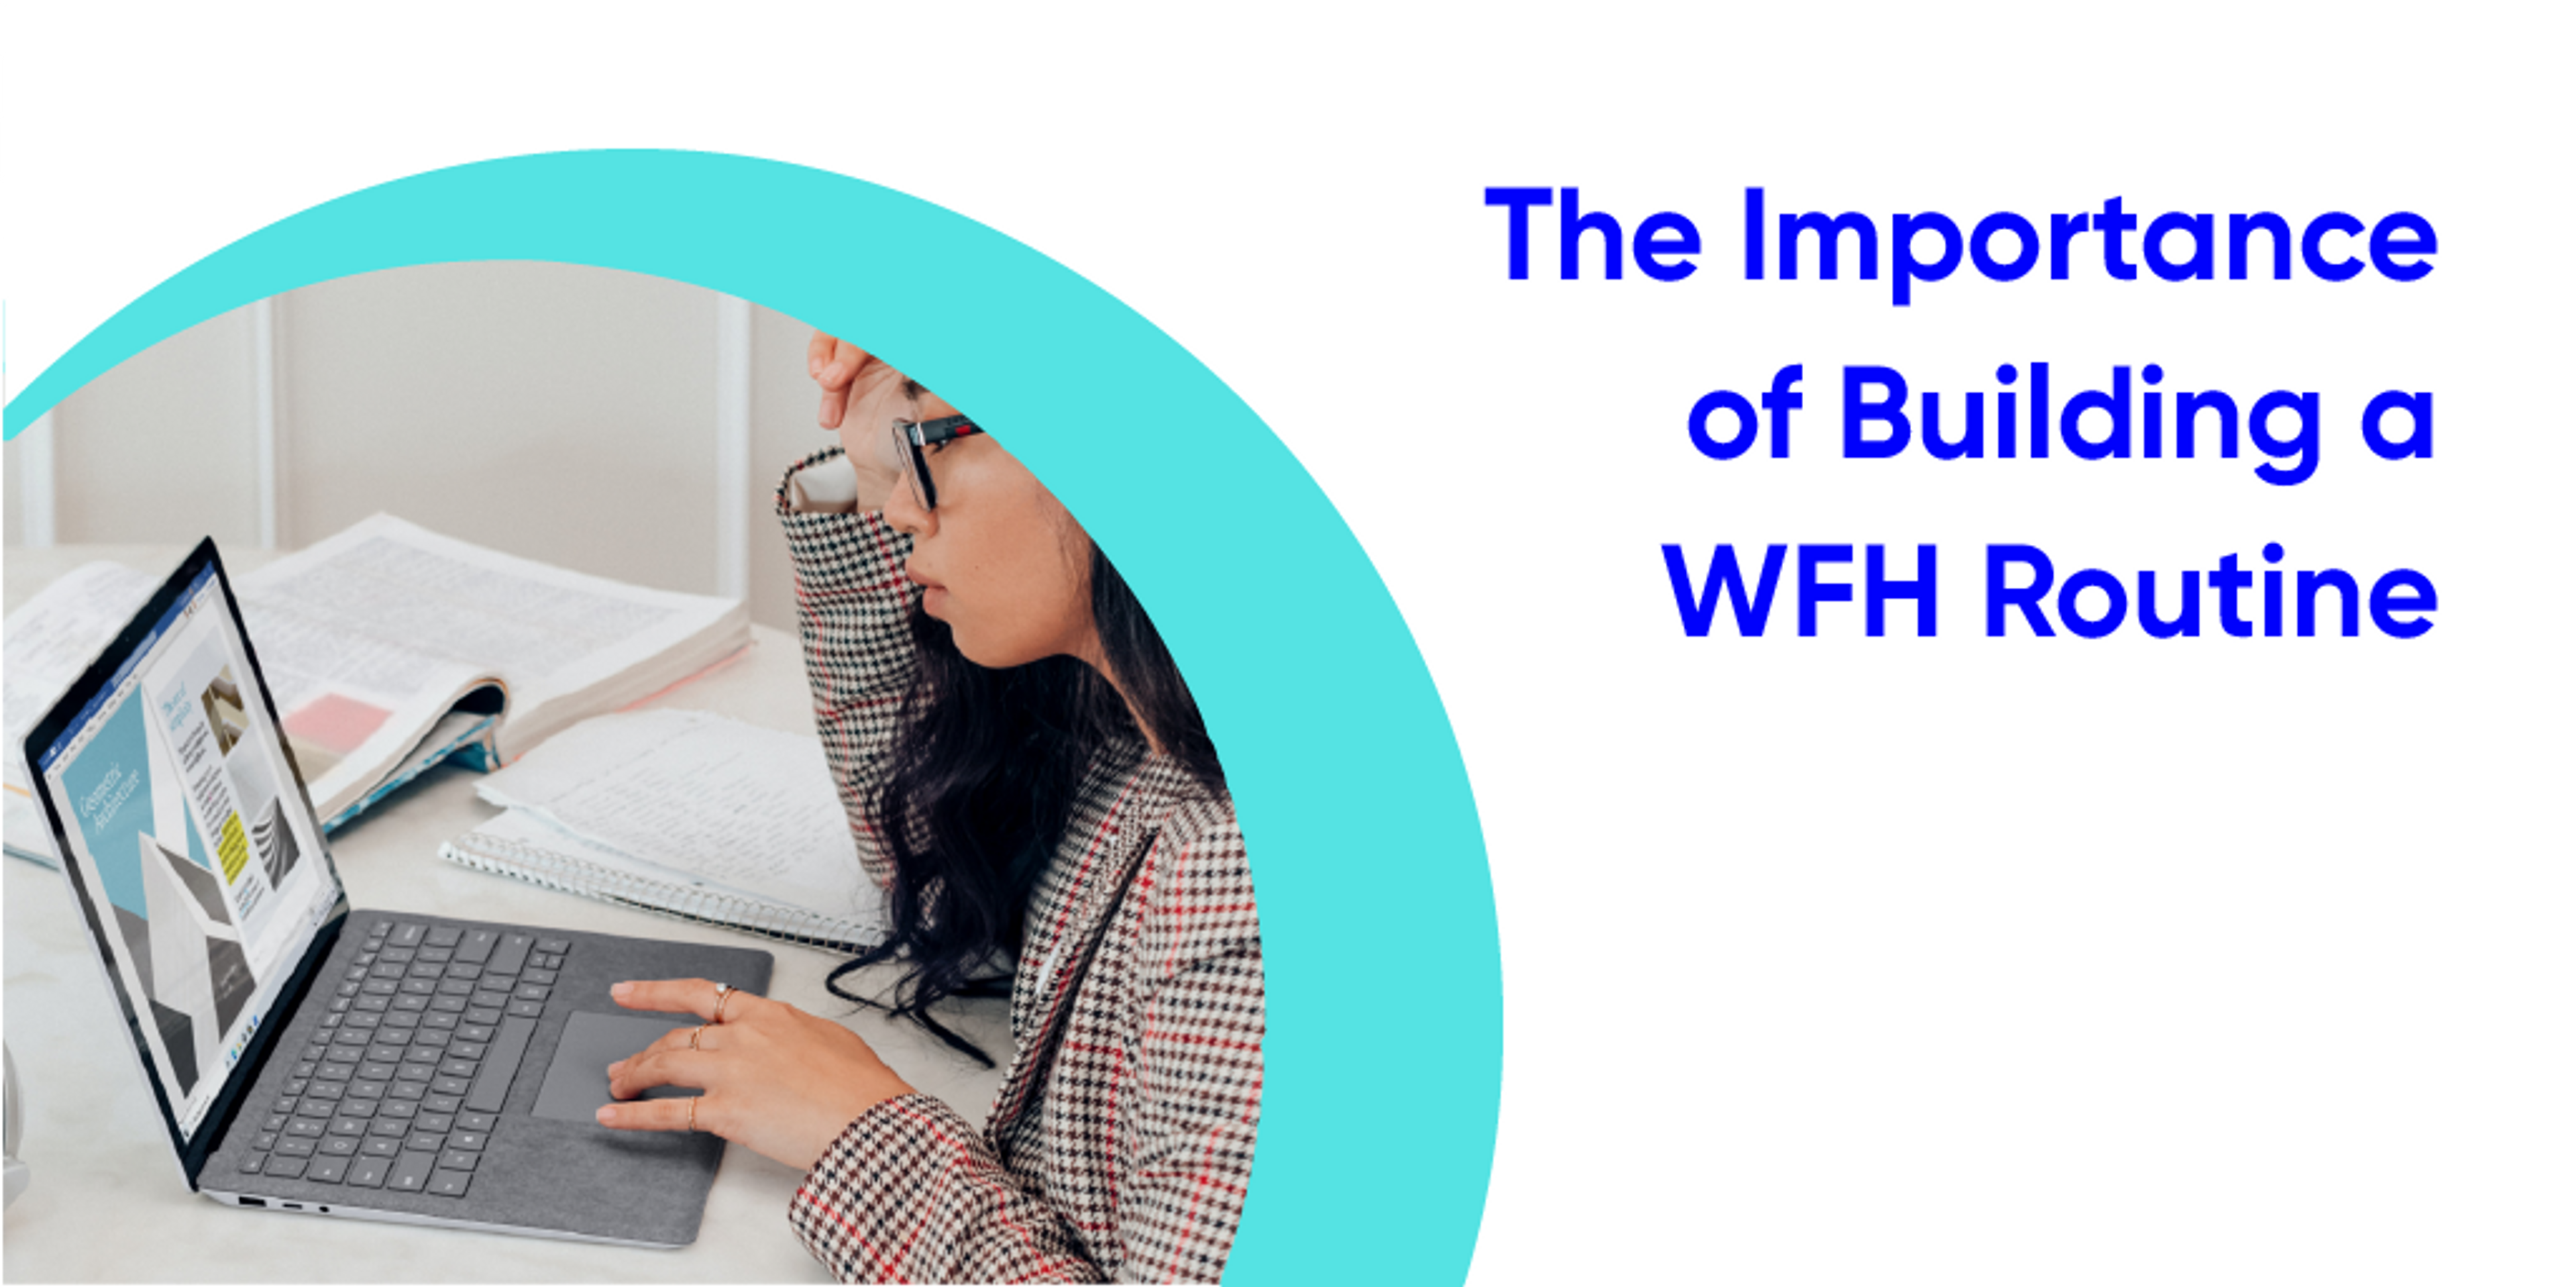 Image of woman at a computer with text in blue that says "The Importance of Building a WFH routine"